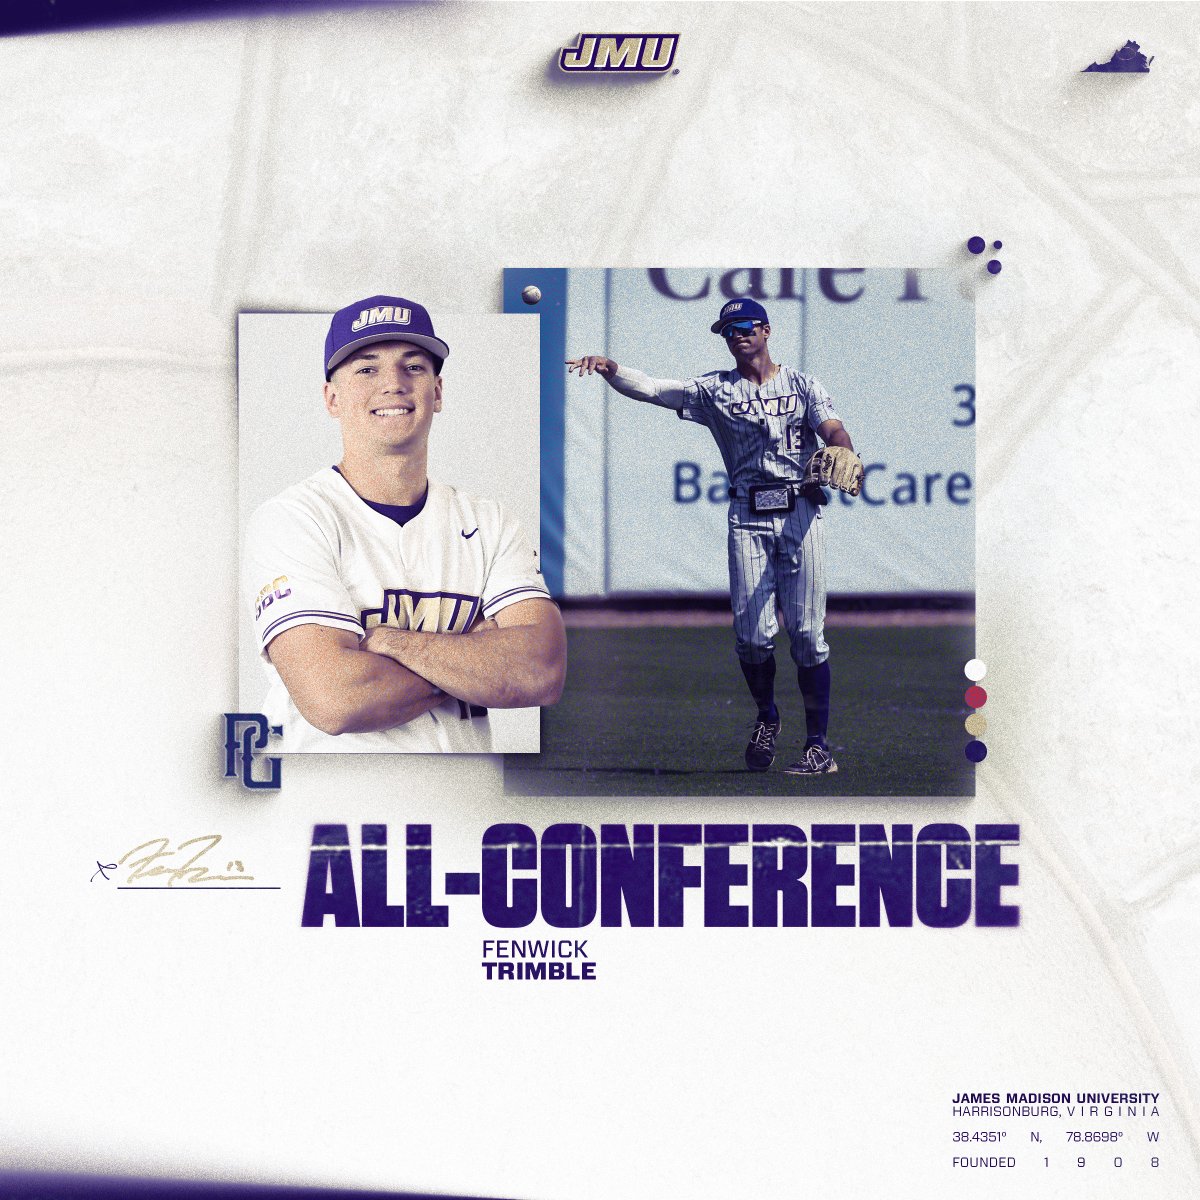 Fenny starting off the preseason accolades with being named Preseason All-Sun Belt by @PerfectGameUSA! #GoDukes | @ftrim__